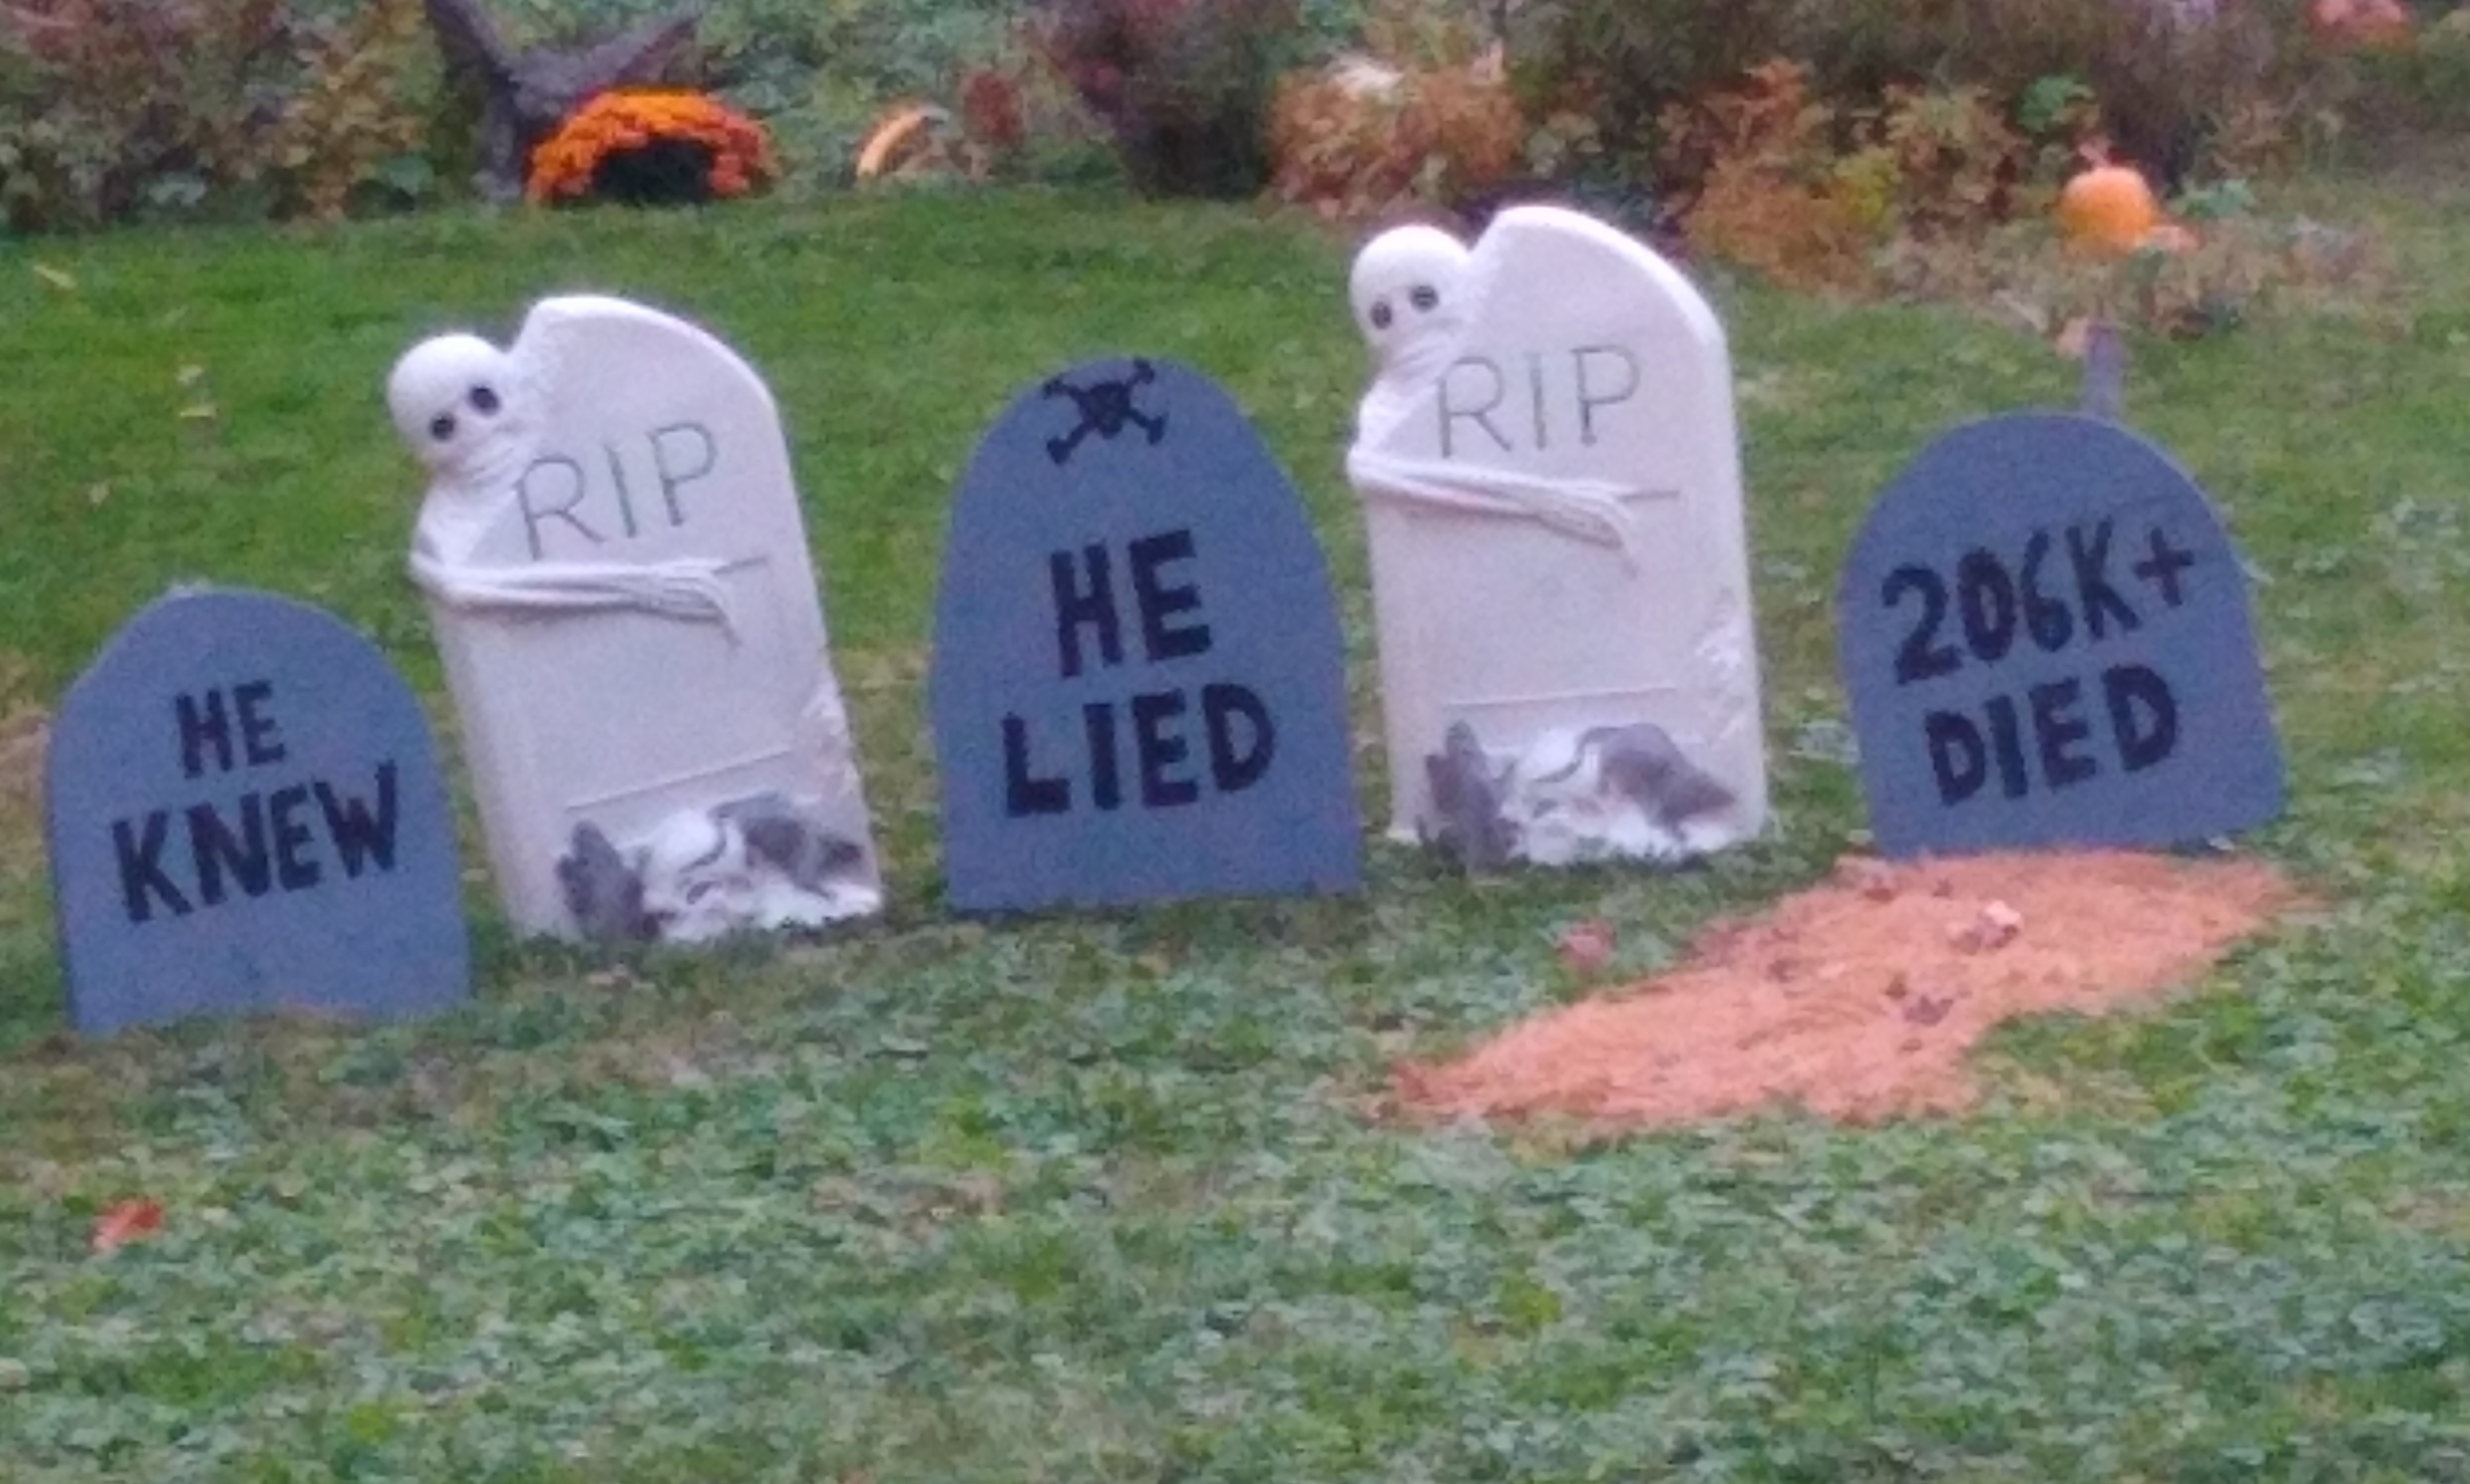 Halloween-style headstone
decorations say 'he knew,' 'he lied,' and '206K died'